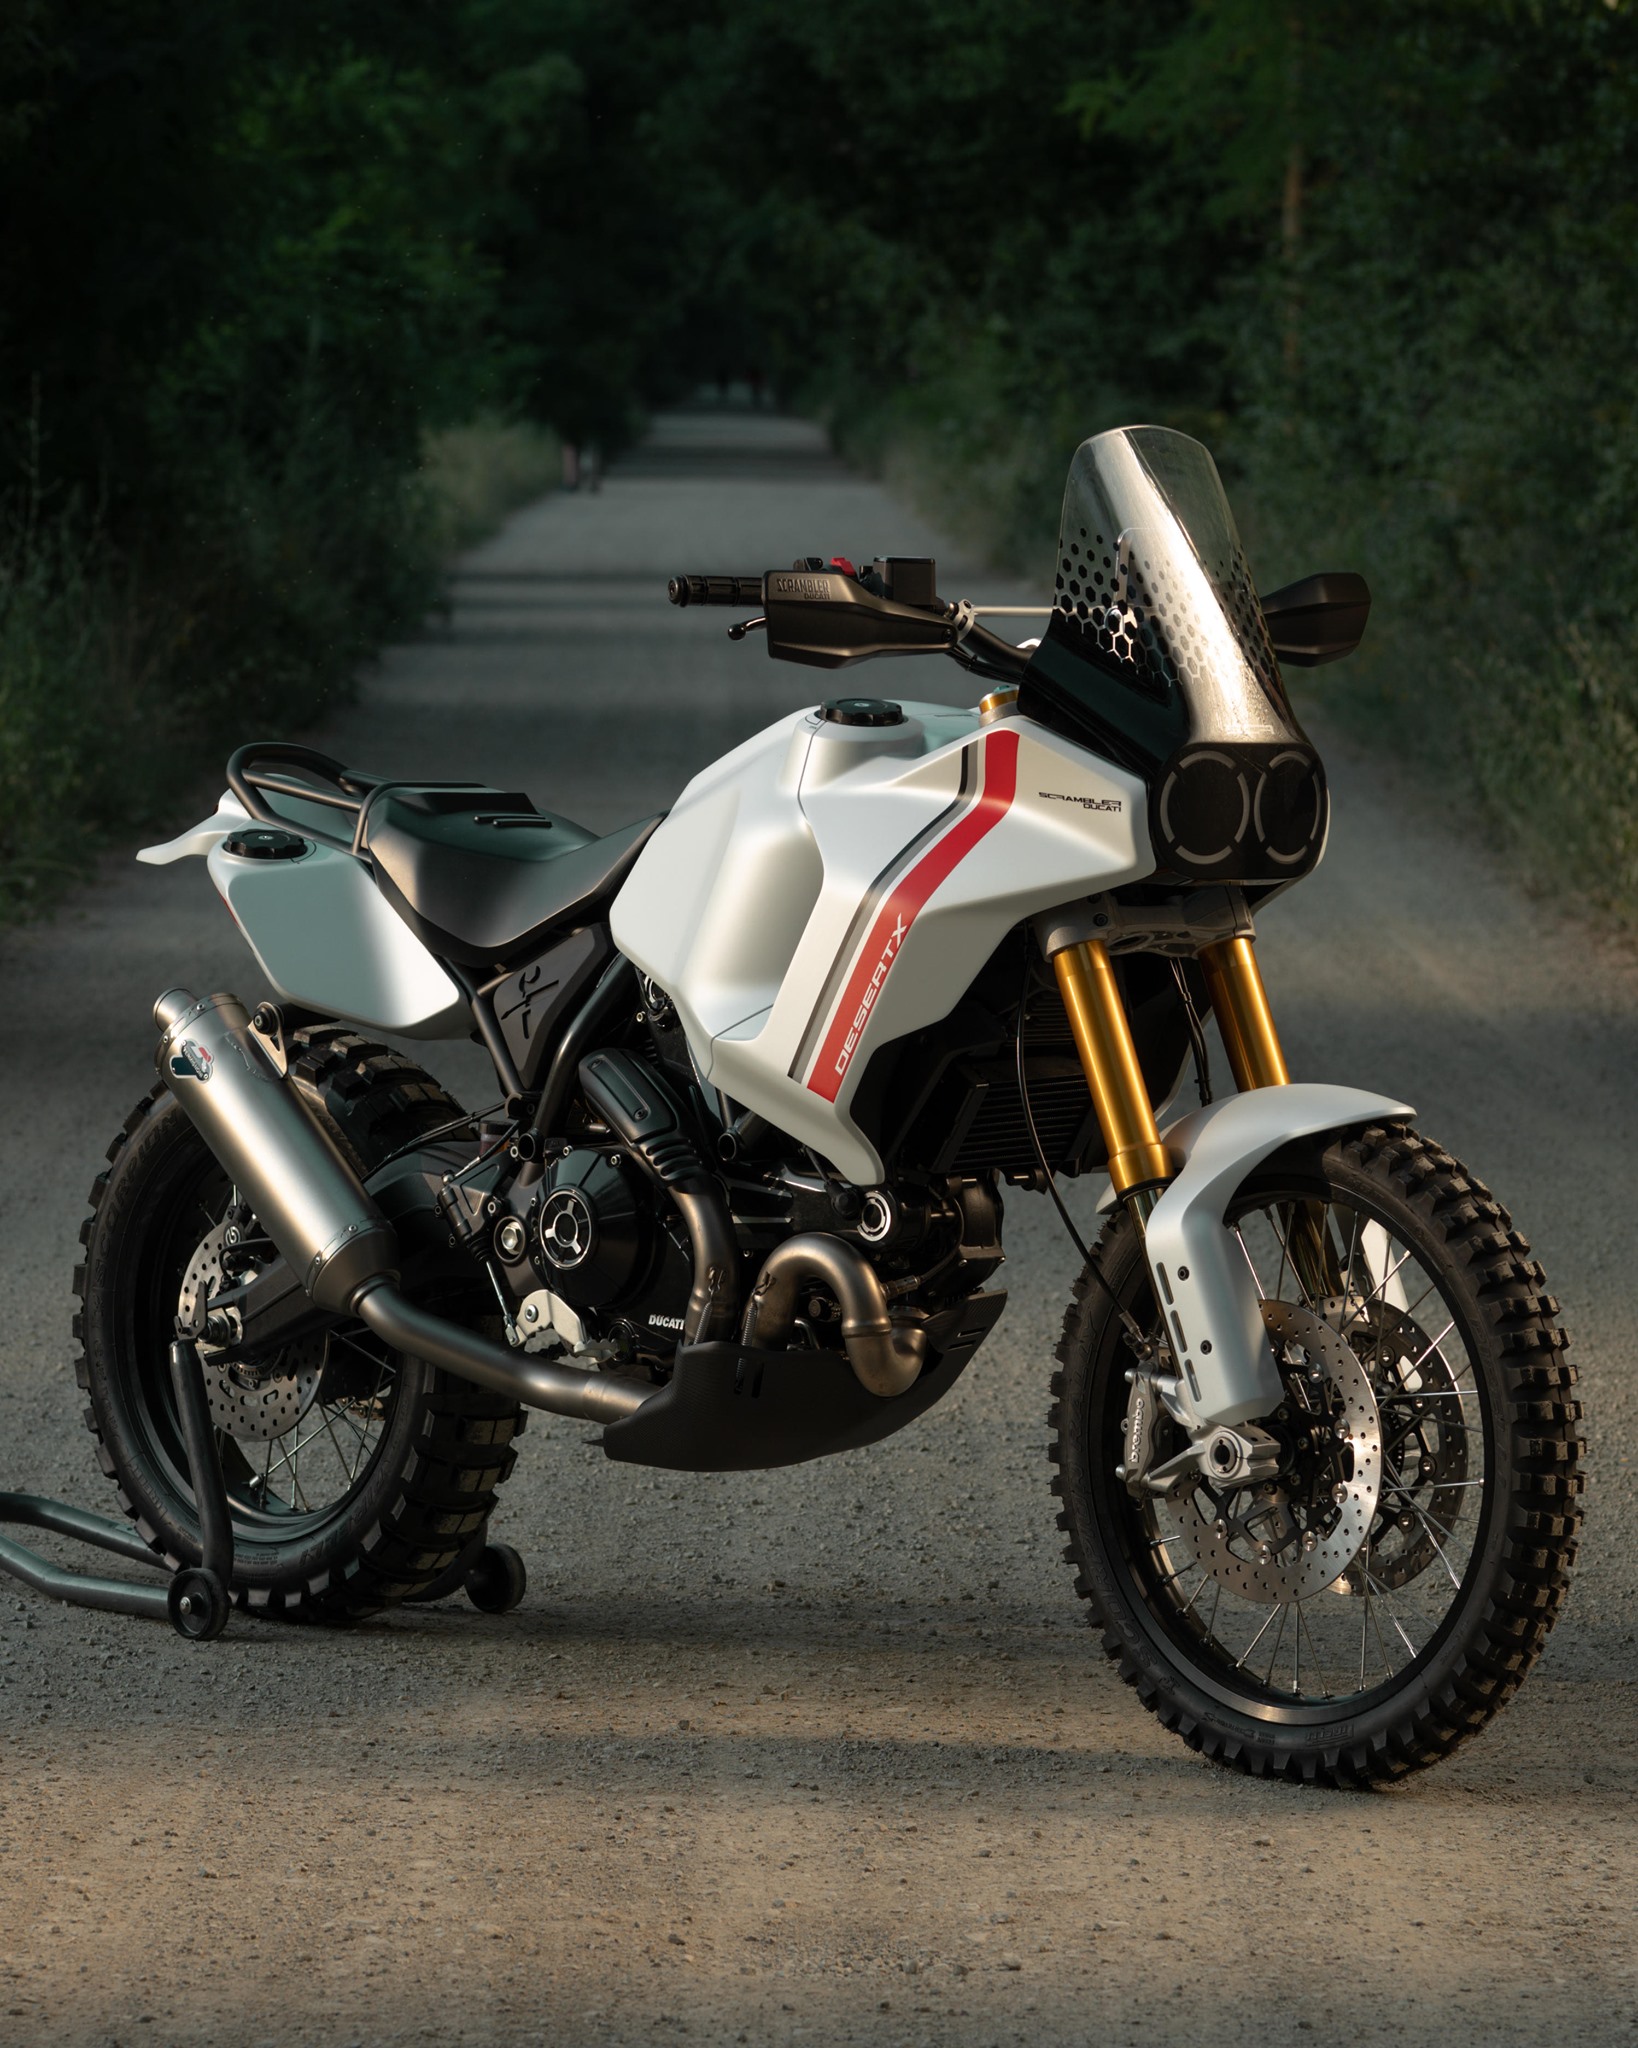 Ducati’s new enduro, the Desert X, may arrive by 2021 end Adrenaline